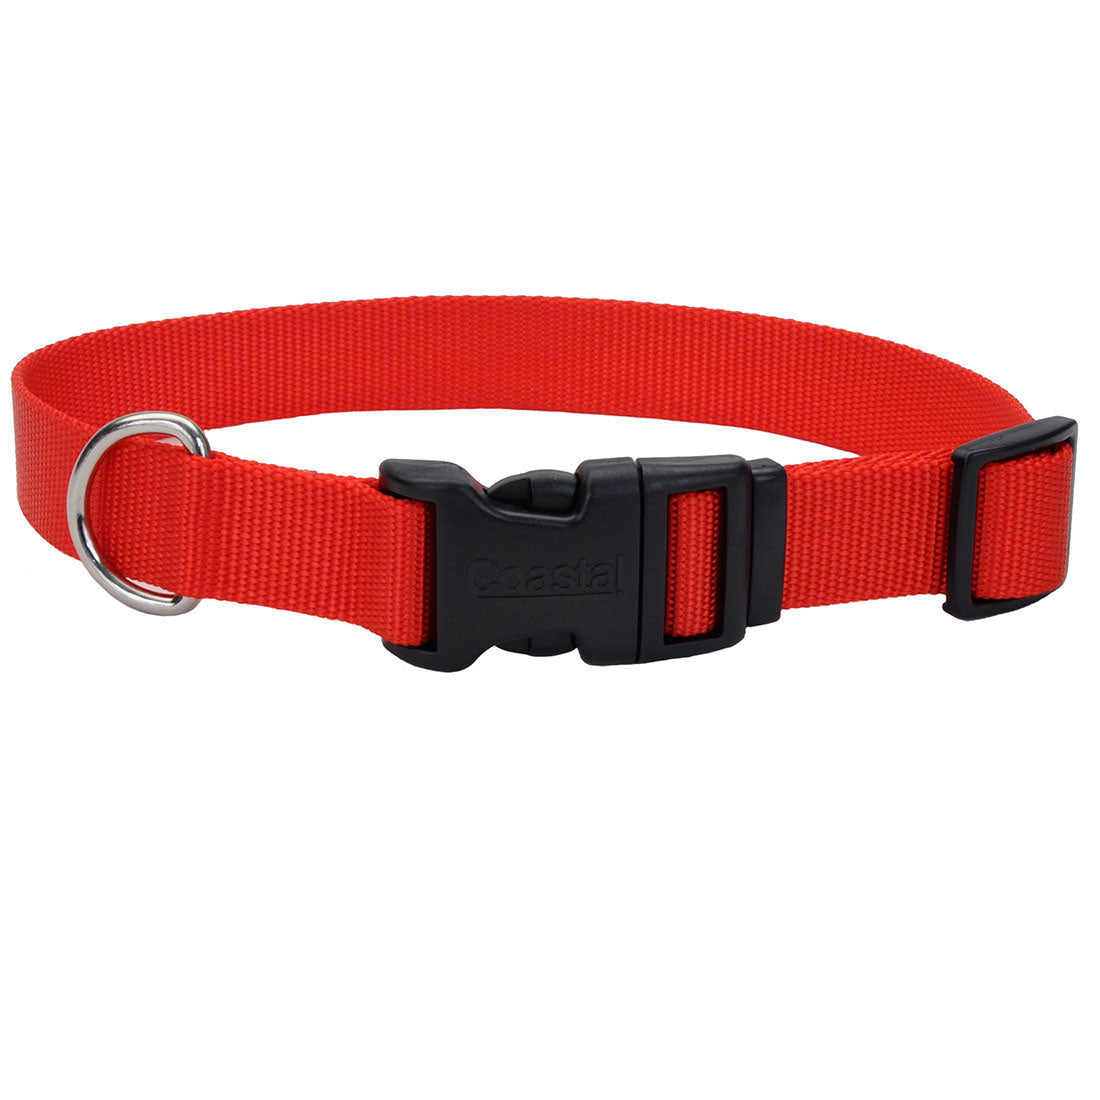 Coastal Pet Dog Collar Adjustable Nylon Red 3.4 In X 14-20 In – Bow & Wow